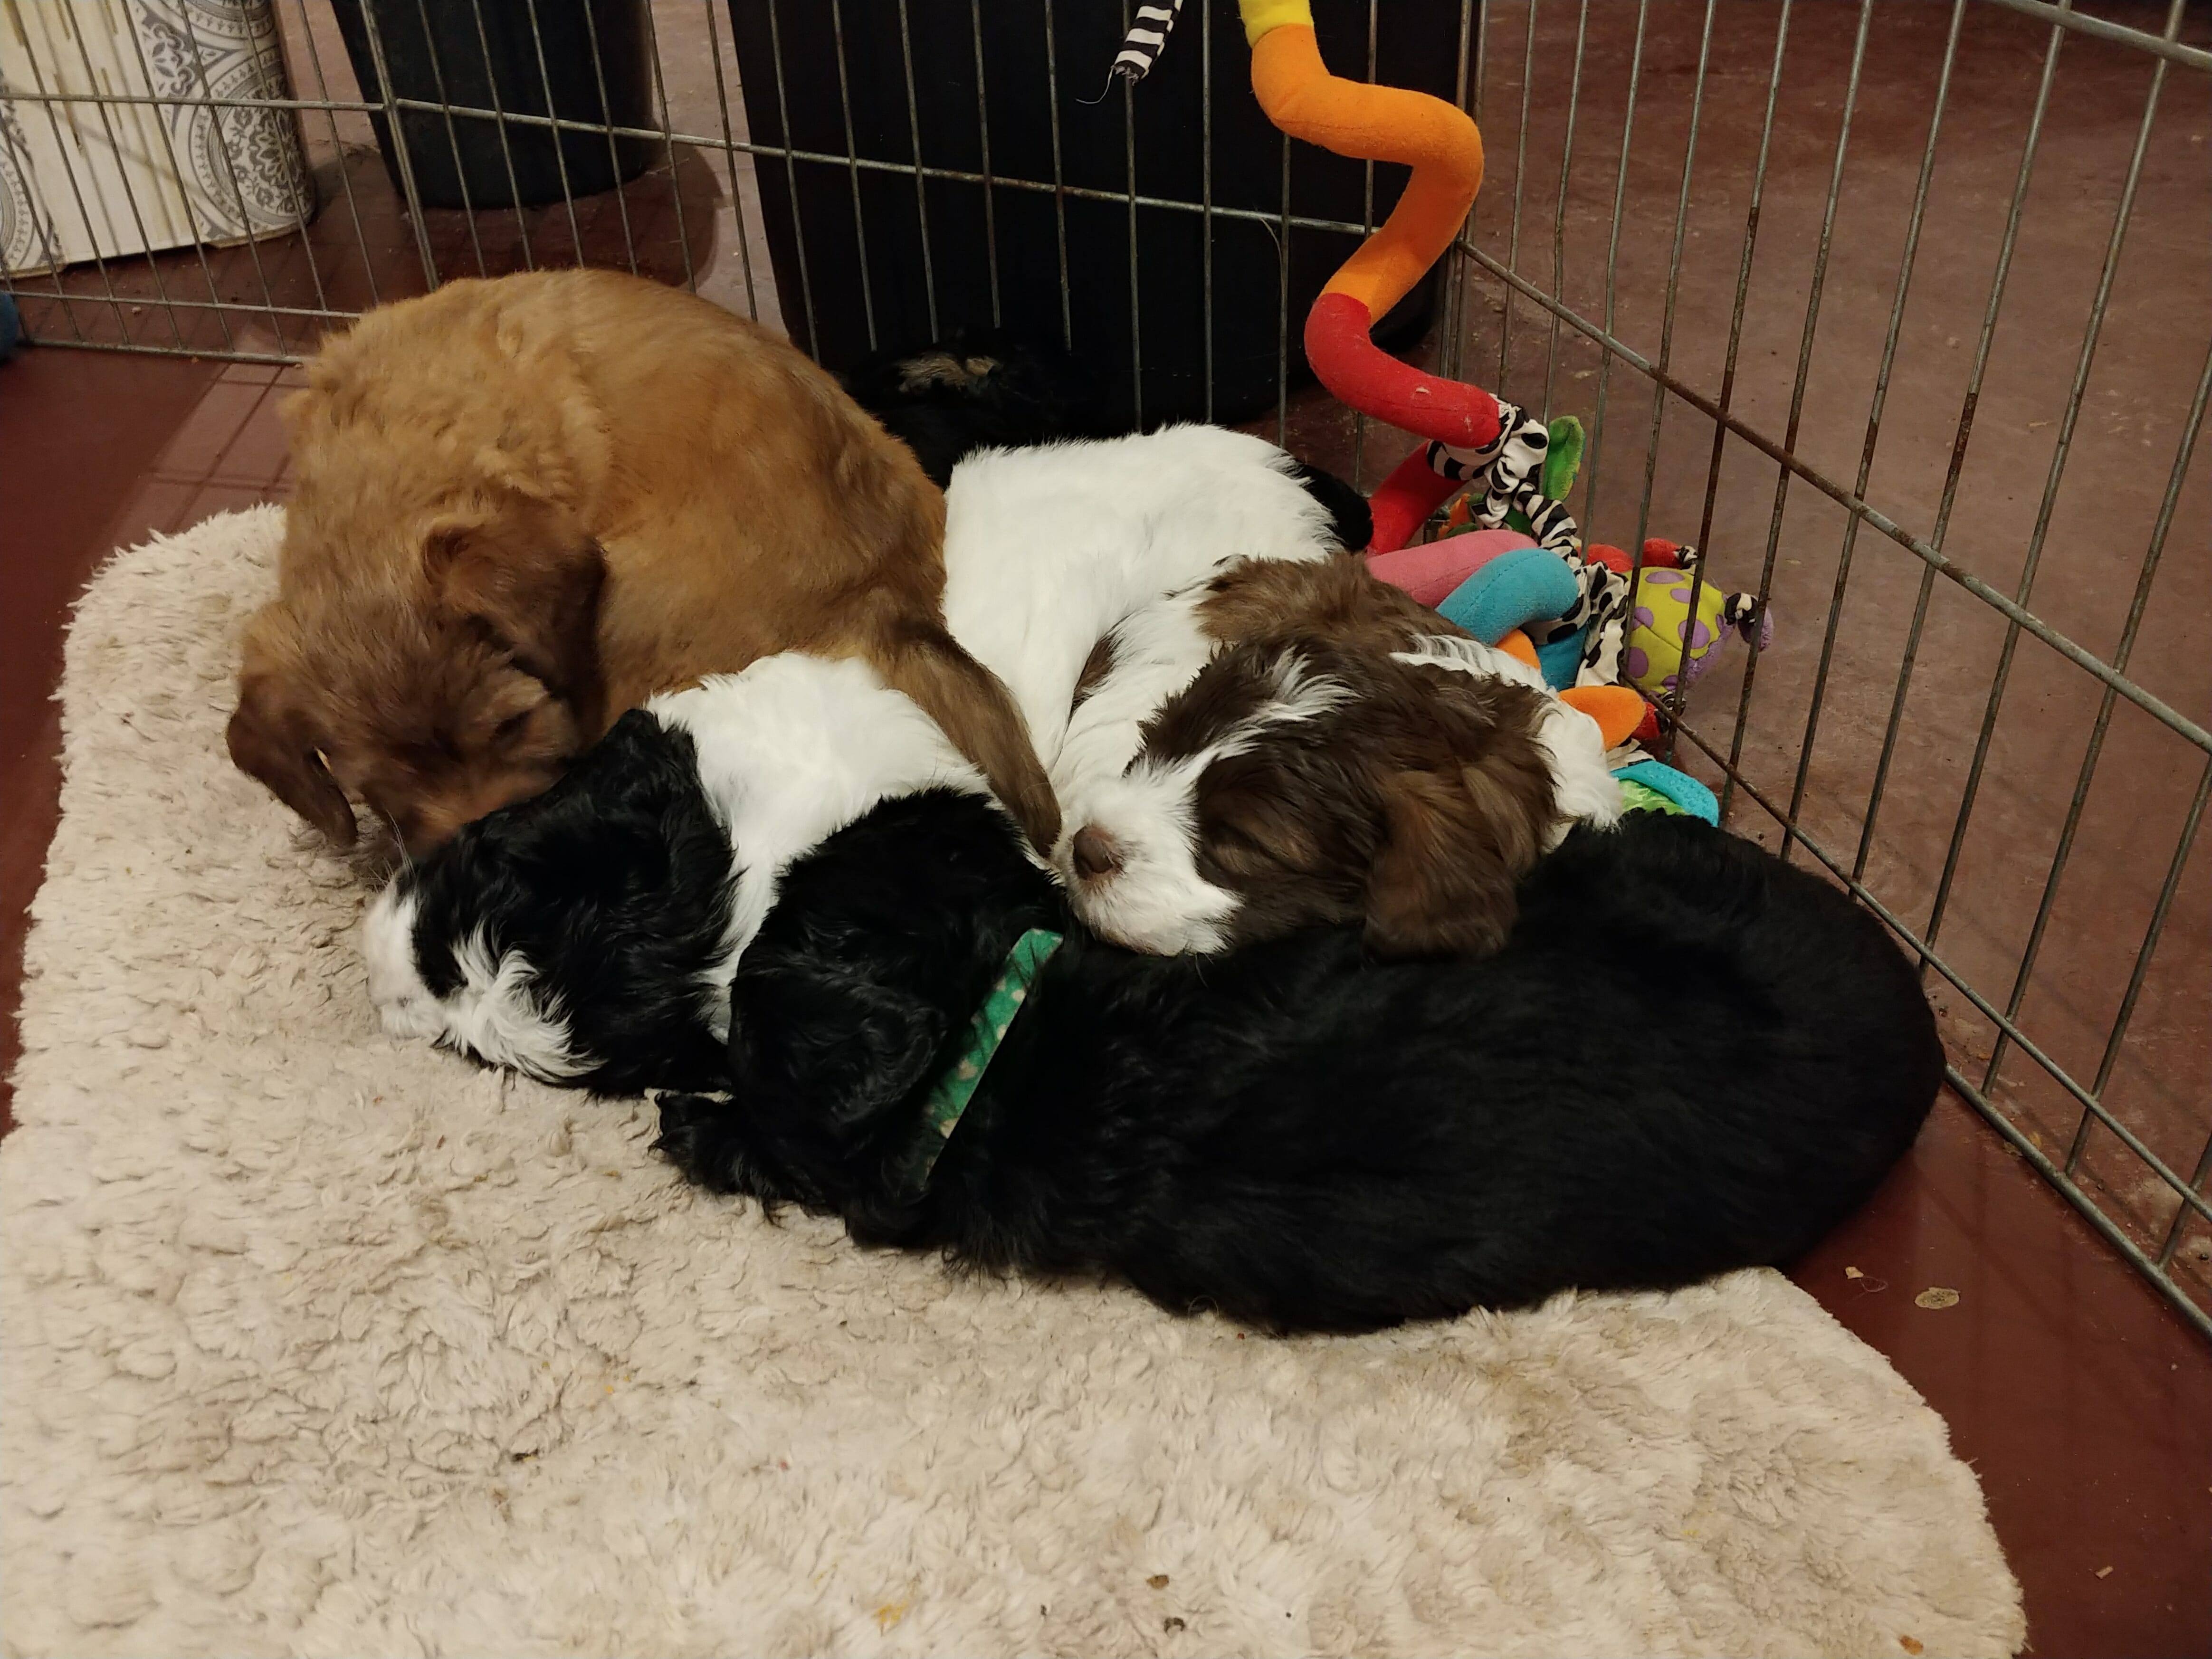 Black, brown, black and white puppies are curled up on top of each other sleeping in their bed